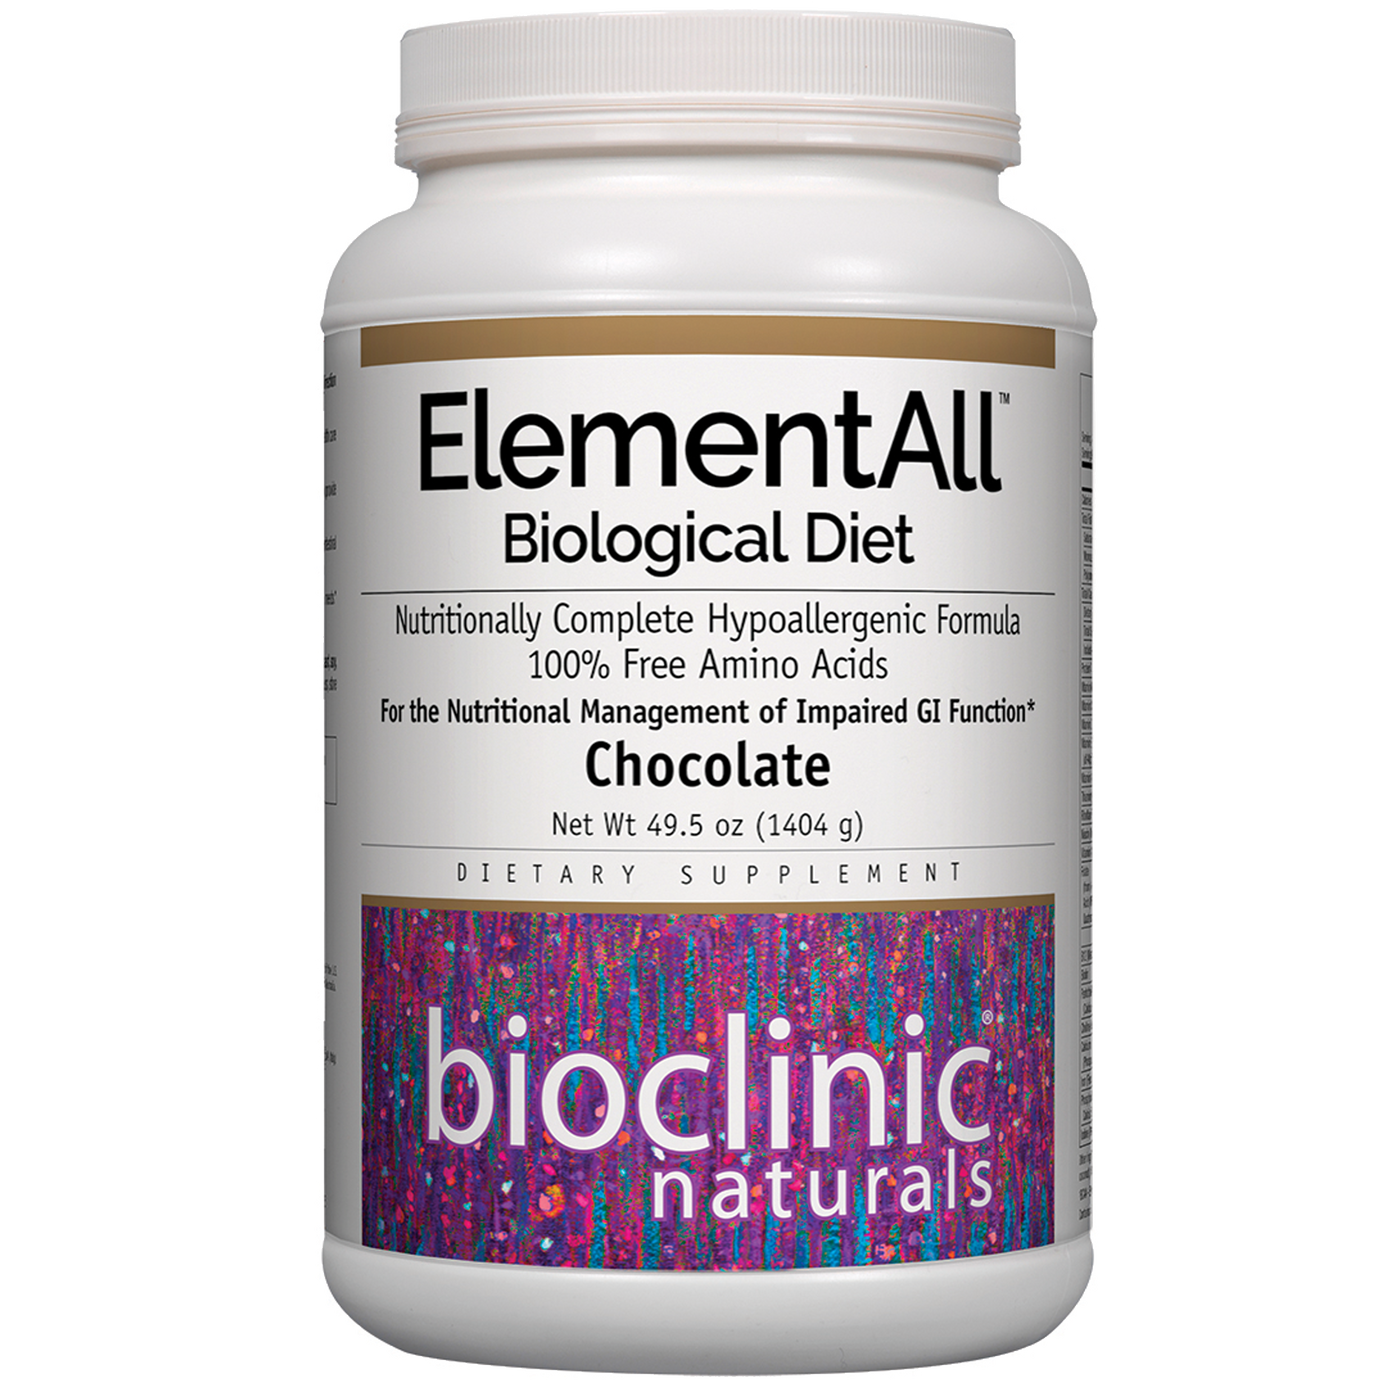 ElementalAllDiet Chocolate ings Curated Wellness